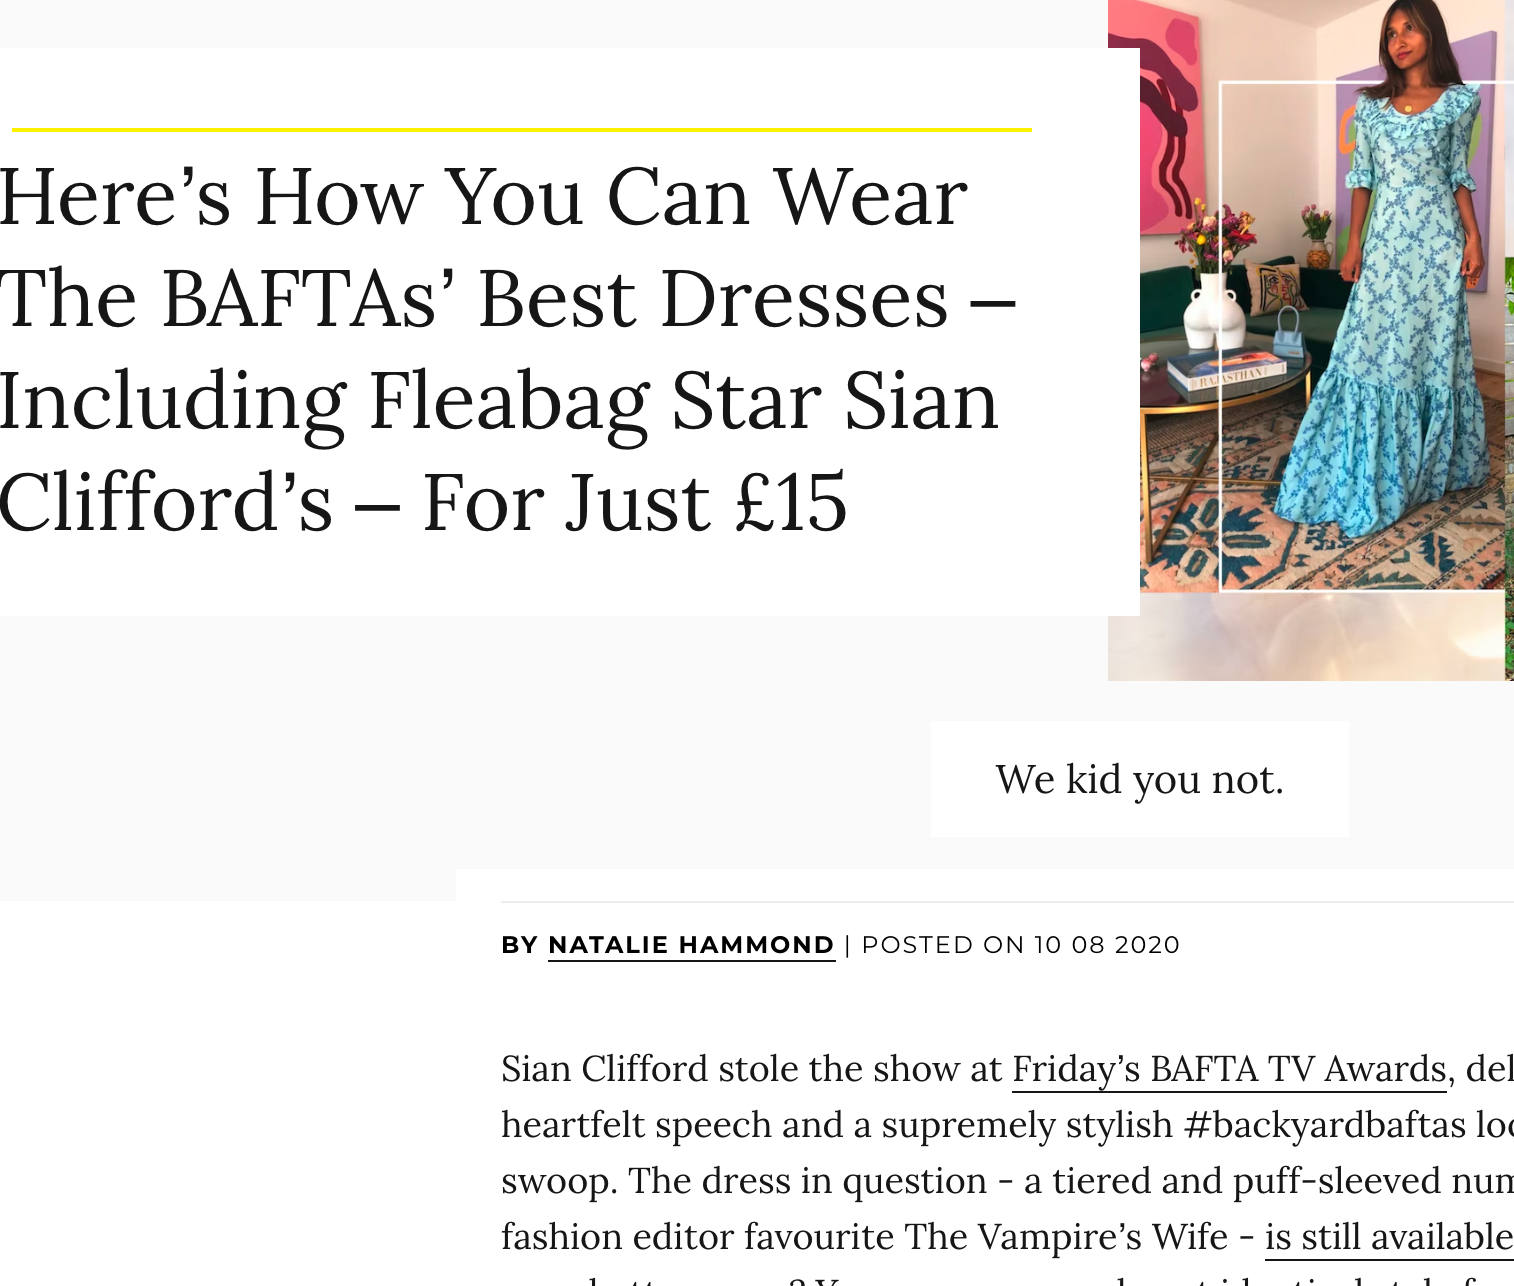 Here’s How You Can Wear The BAFTAs’ Best Dresses